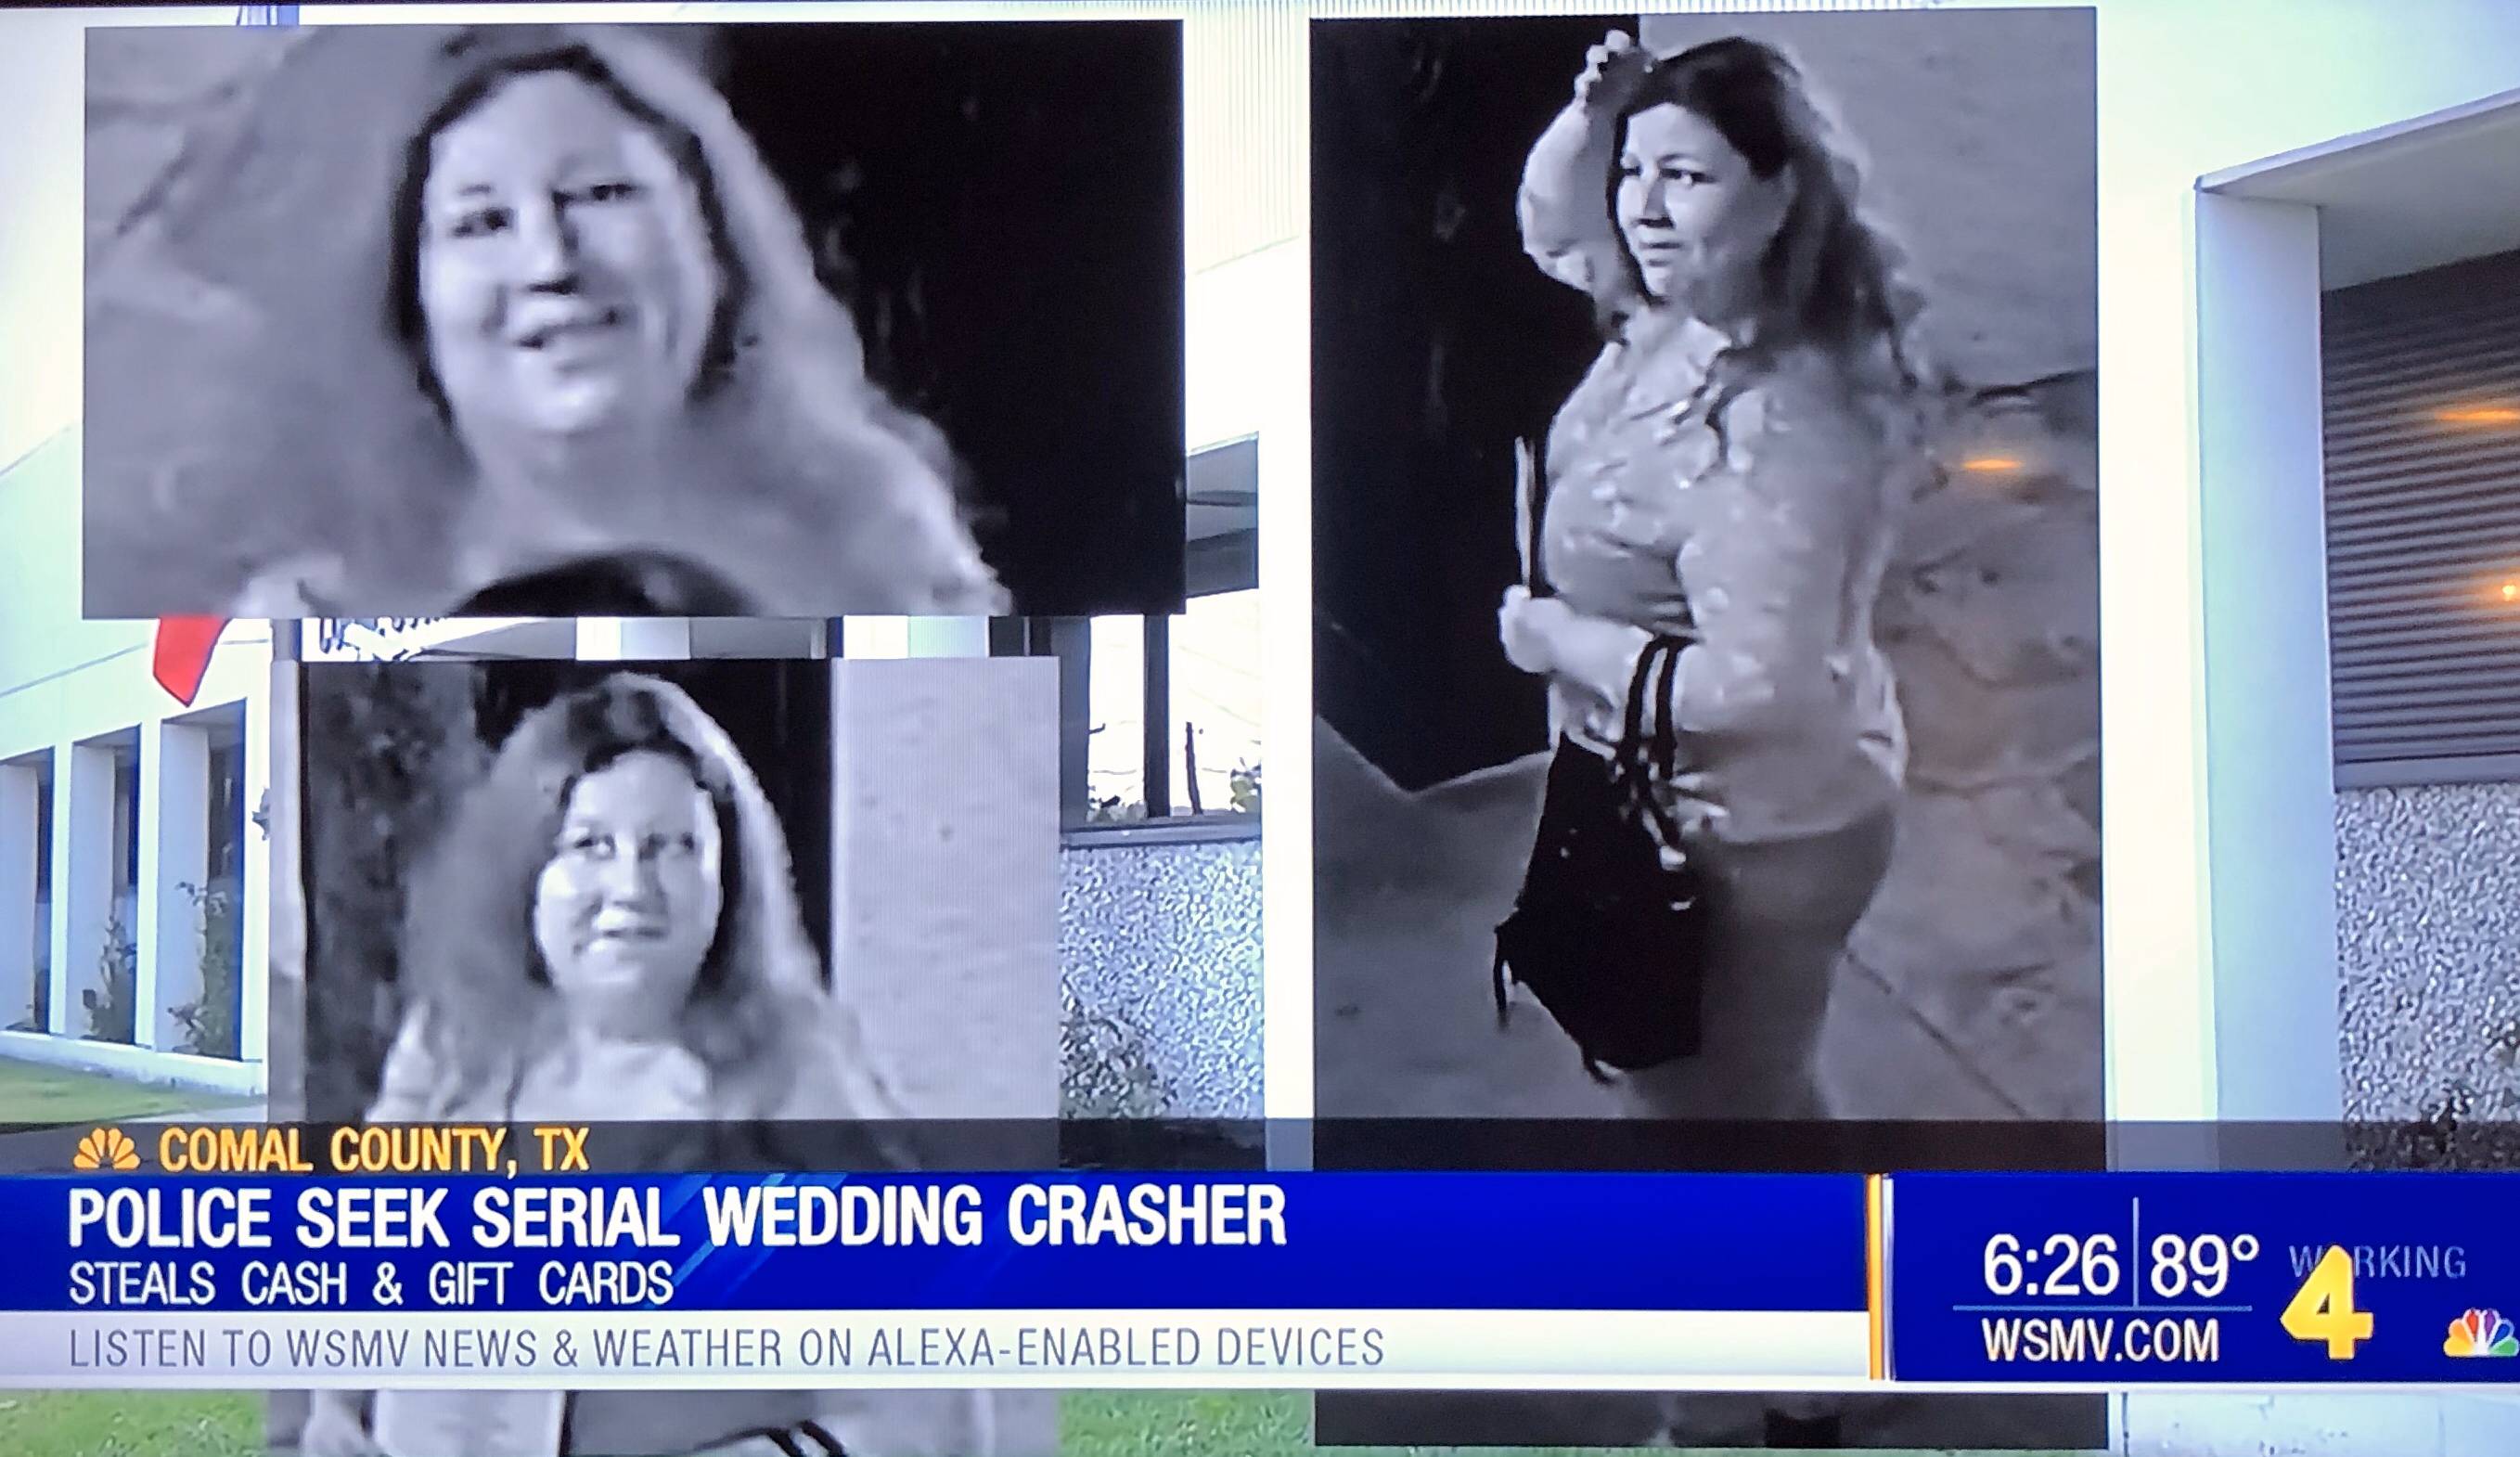 video - S Comal County, Tx Police Seek Serial Wedding Crasher Steals Cash & Gift Cards Listen To Wsmv News & Weather On AlexaEnabled Devices 89 Working Bking Wsmv.Com